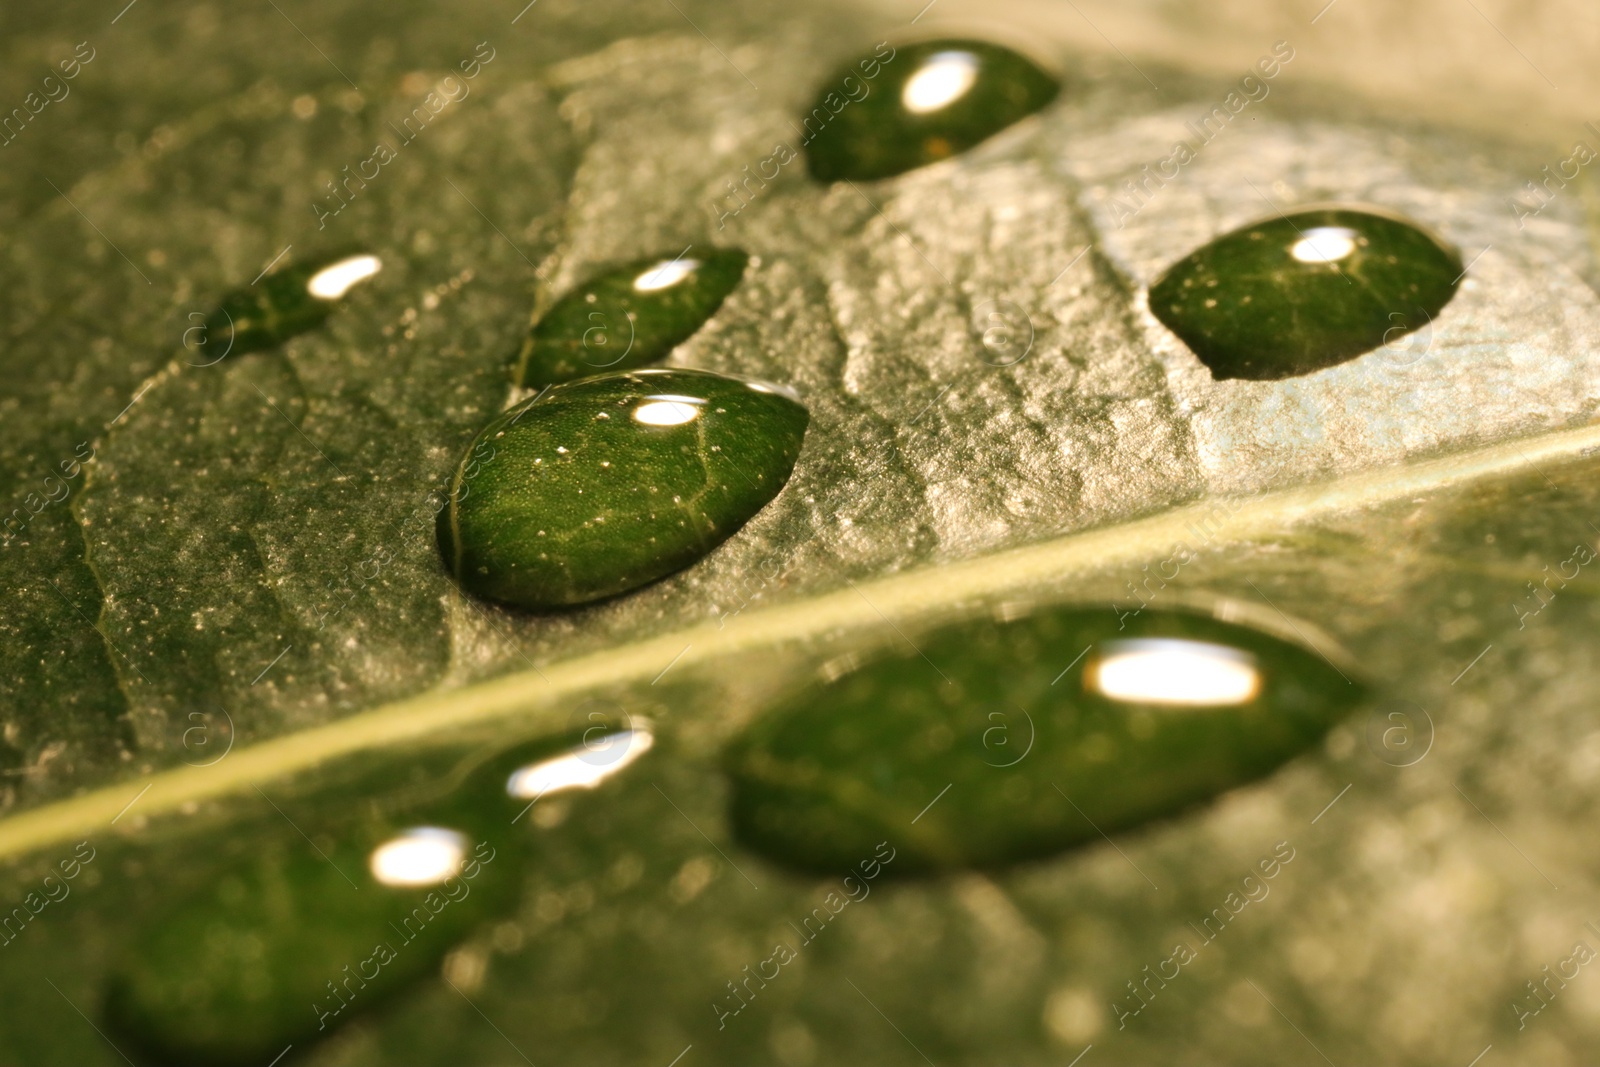 Photo of Water drops on green leaf, macro view